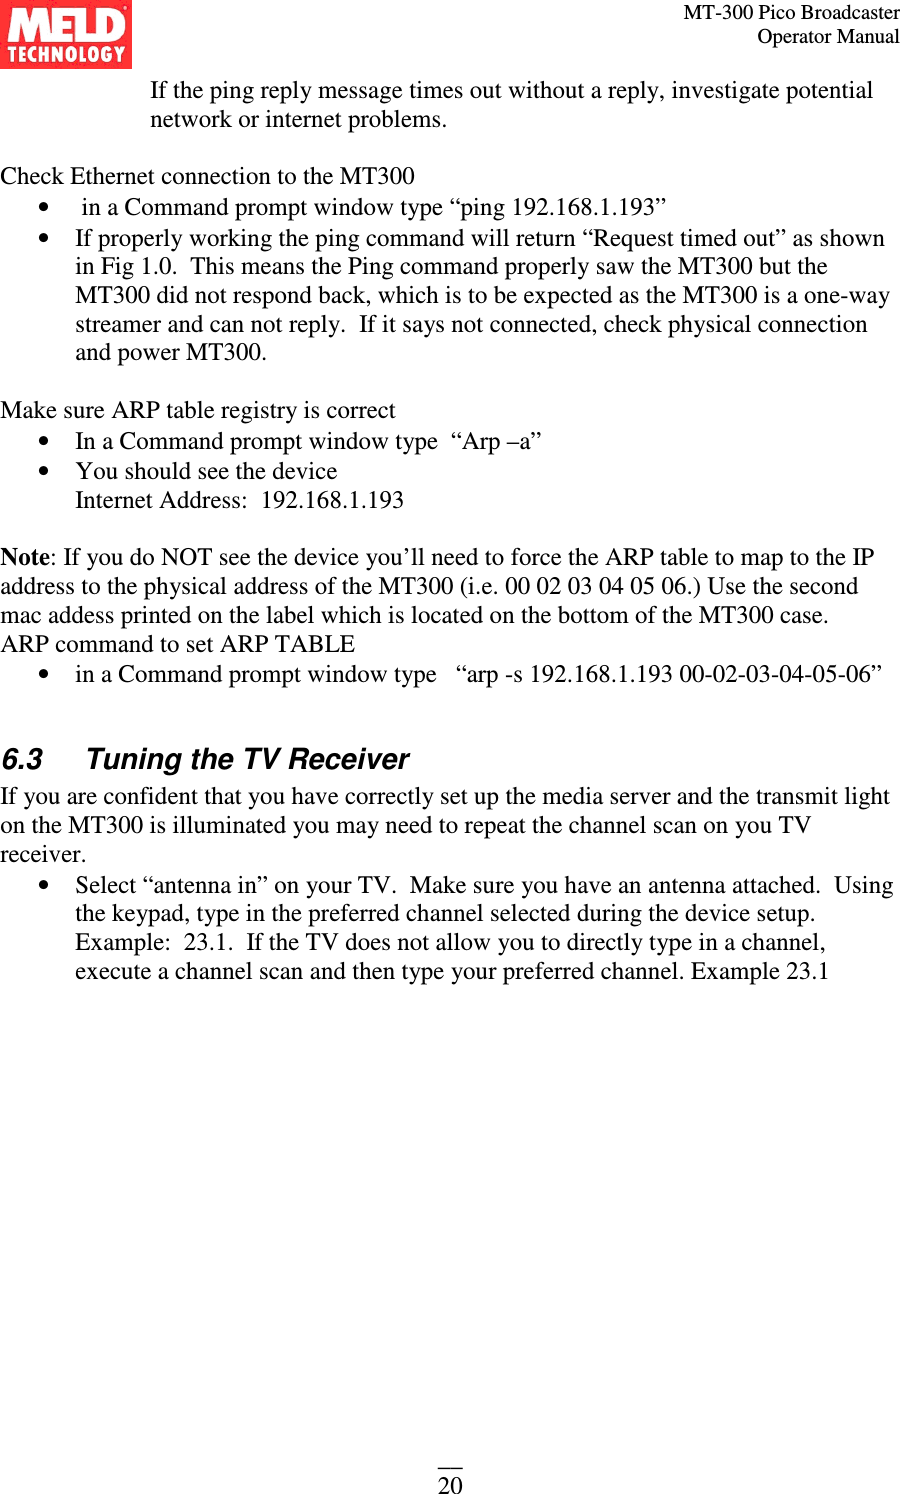 MT-300 Pico Broadcaster                                                                                                                                             Operator Manual __ 20 If the ping reply message times out without a reply, investigate potential network or internet problems.  Check Ethernet connection to the MT300  •  in a Command prompt window type “ping 192.168.1.193” • If properly working the ping command will return “Request timed out” as shown in Fig 1.0.  This means the Ping command properly saw the MT300 but the MT300 did not respond back, which is to be expected as the MT300 is a one-way streamer and can not reply.  If it says not connected, check physical connection and power MT300.    Make sure ARP table registry is correct • In a Command prompt window type  “Arp –a” • You should see the device  Internet Address:  192.168.1.193  Note: If you do NOT see the device you’ll need to force the ARP table to map to the IP address to the physical address of the MT300 (i.e. 00 02 03 04 05 06.) Use the second mac addess printed on the label which is located on the bottom of the MT300 case.  ARP command to set ARP TABLE  • in a Command prompt window type   “arp -s 192.168.1.193 00-02-03-04-05-06”  6.3   Tuning the TV Receiver If you are confident that you have correctly set up the media server and the transmit light on the MT300 is illuminated you may need to repeat the channel scan on you TV receiver.  • Select “antenna in” on your TV.  Make sure you have an antenna attached.  Using the keypad, type in the preferred channel selected during the device setup. Example:  23.1.  If the TV does not allow you to directly type in a channel, execute a channel scan and then type your preferred channel. Example 23.1 